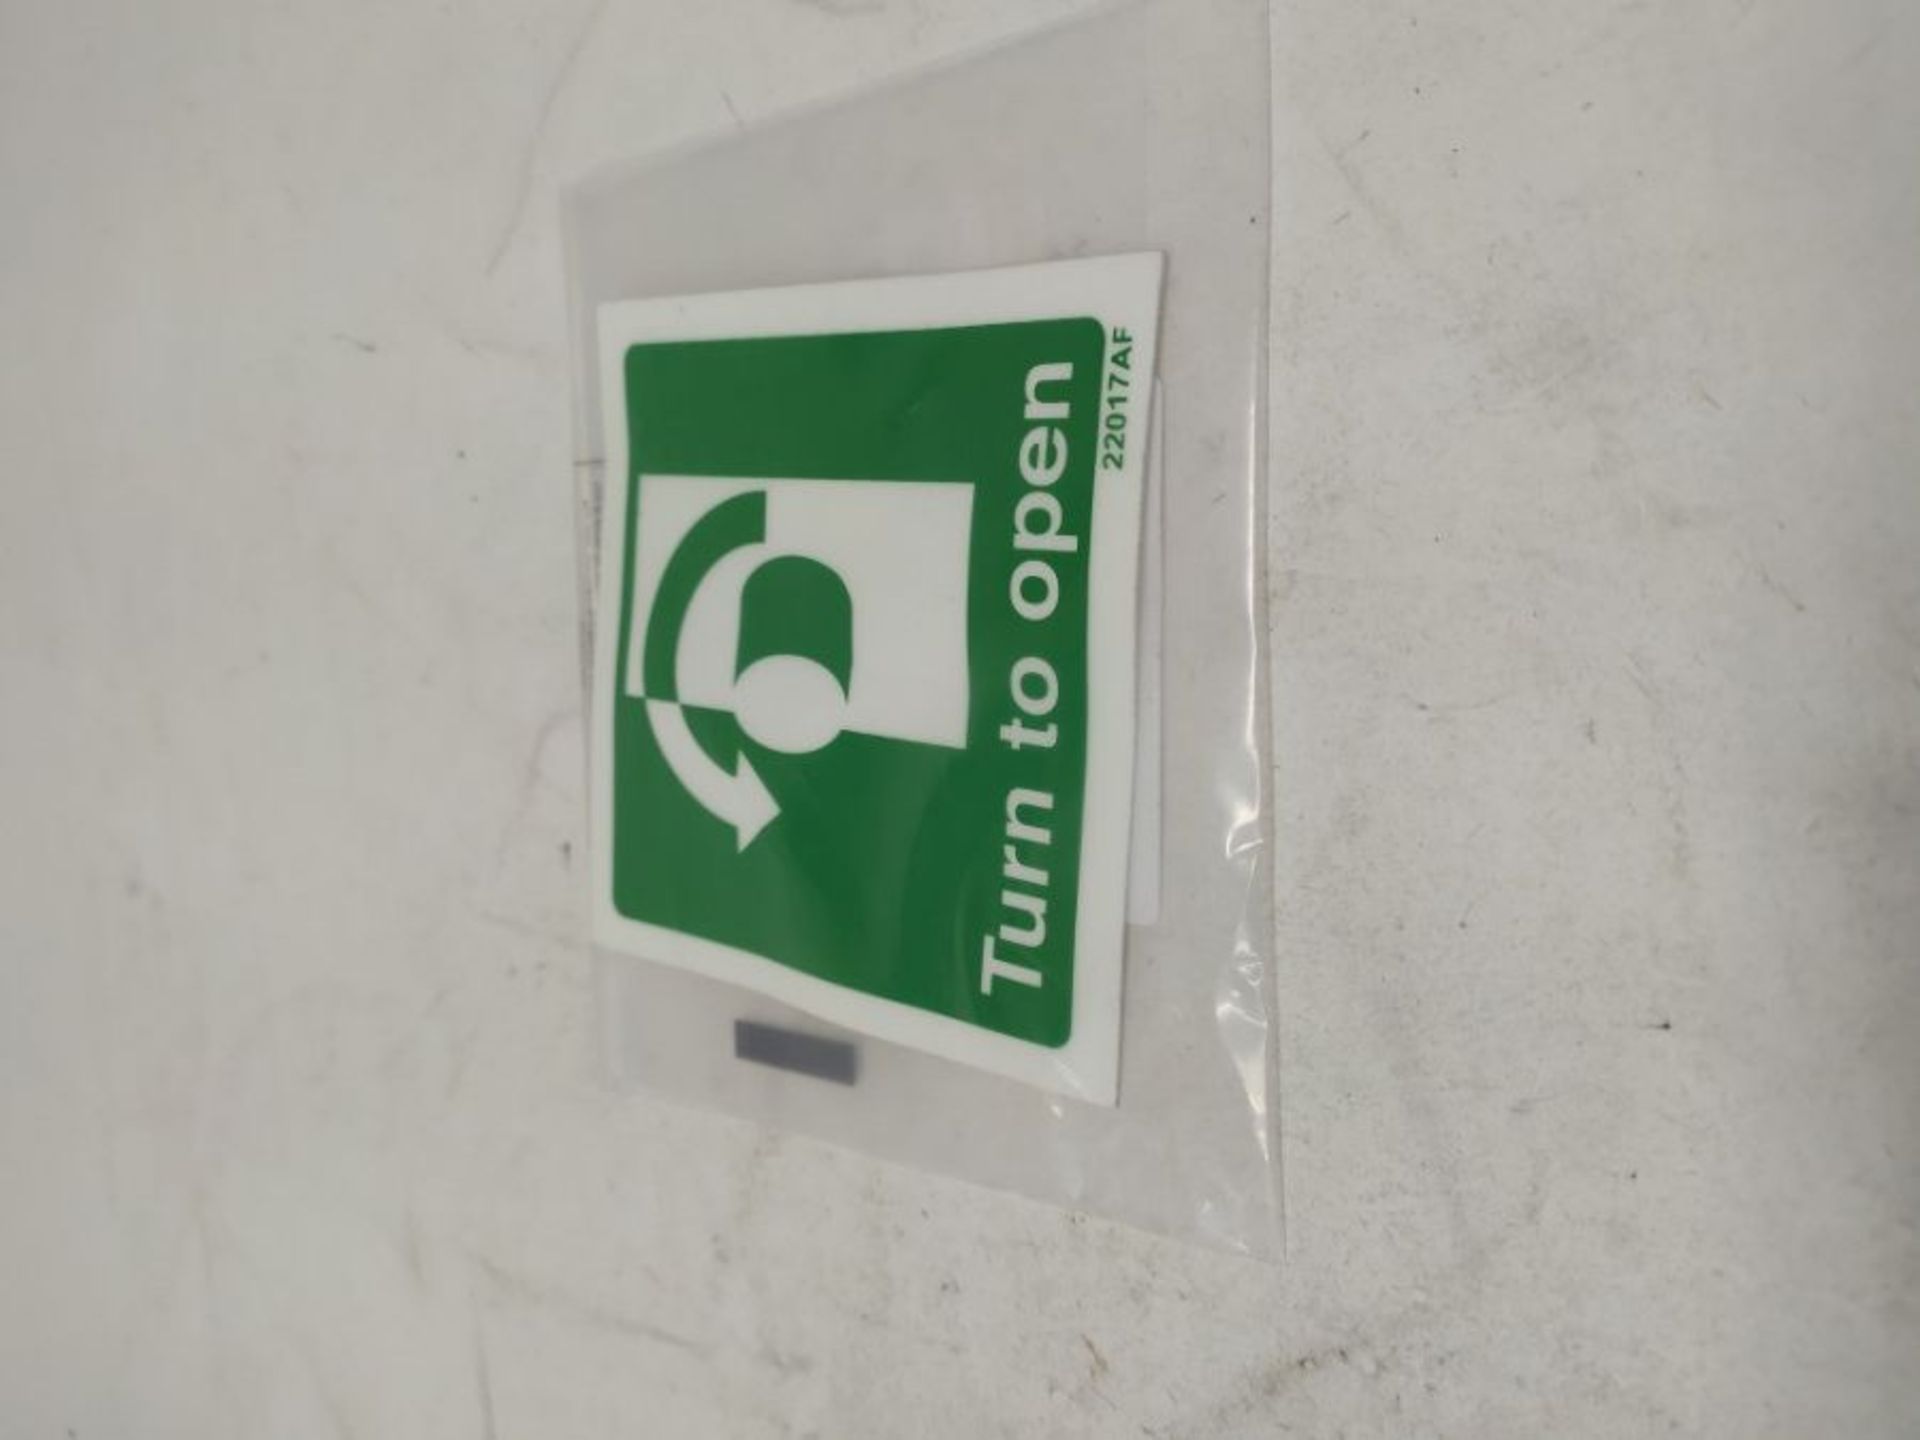 VSafety Glow In The Dark Turn To Open (Anti-Clockwise) Door Sign - 100mm x 100mm - Sel - Image 2 of 2